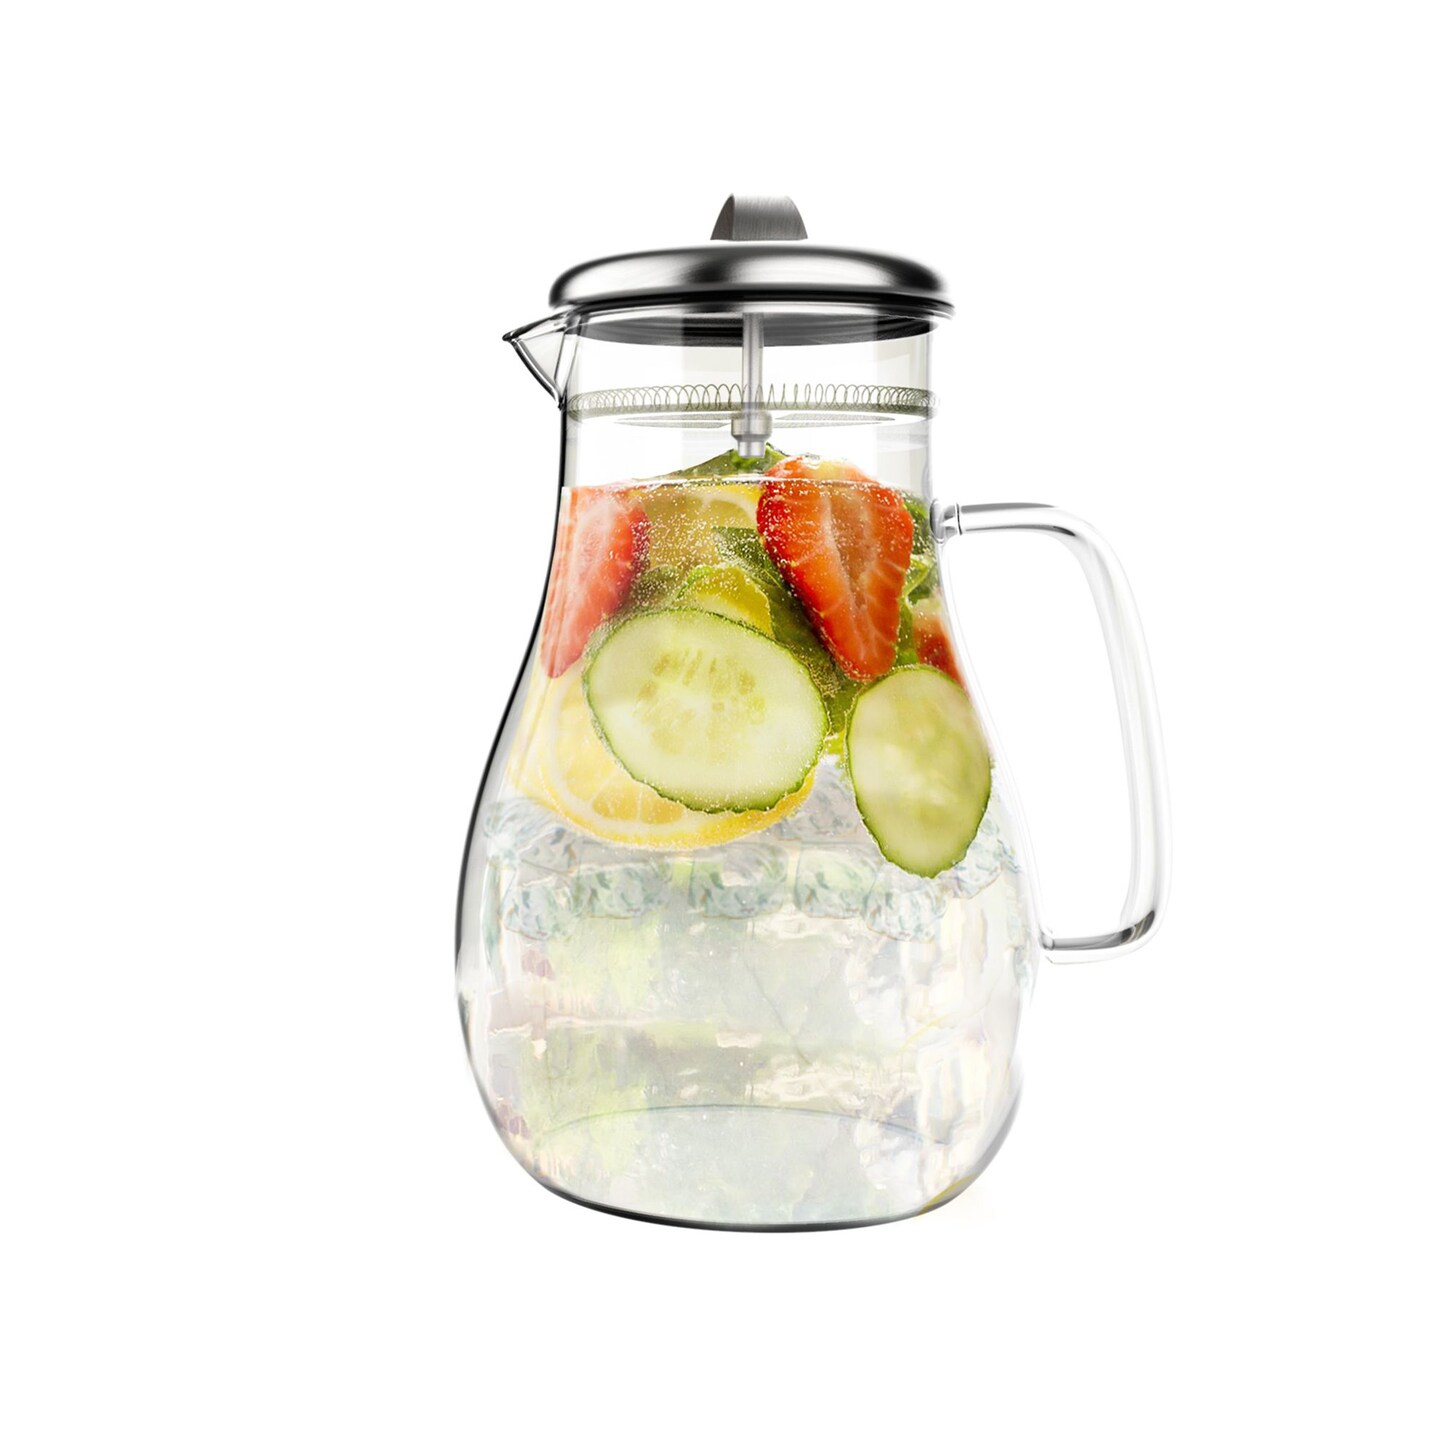 Classic Cuisine Glass Pitcher-64oz. Carafe with Stainless Steel Filter Lid-  Heat Resistant to 300F